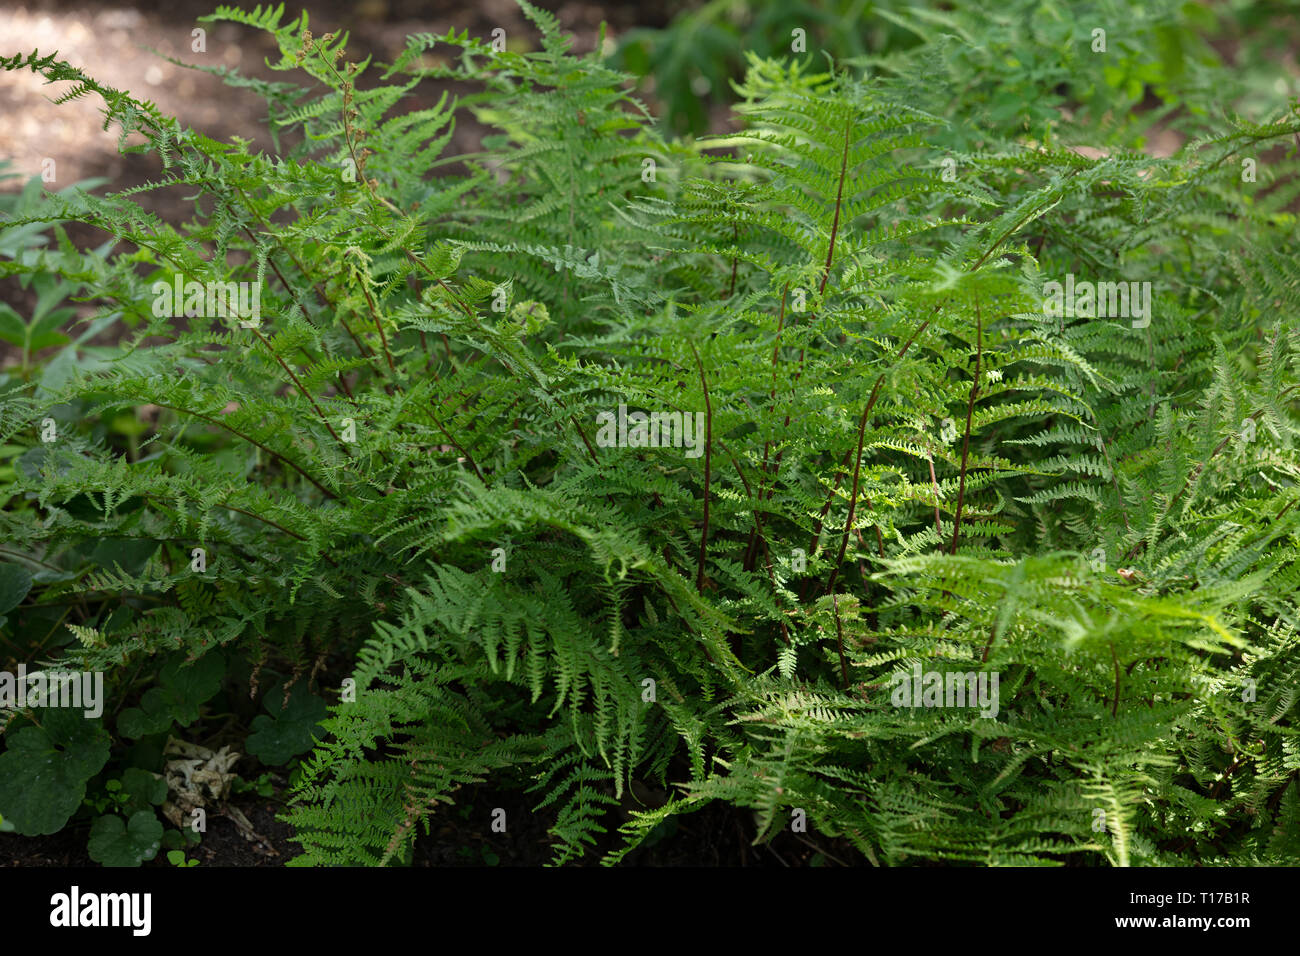 Athyrium filix-femina or Lady Fern, are attractive fern plants for the gardens to be used in damp and shady places to contrast with other leafy plants. Stock Photo